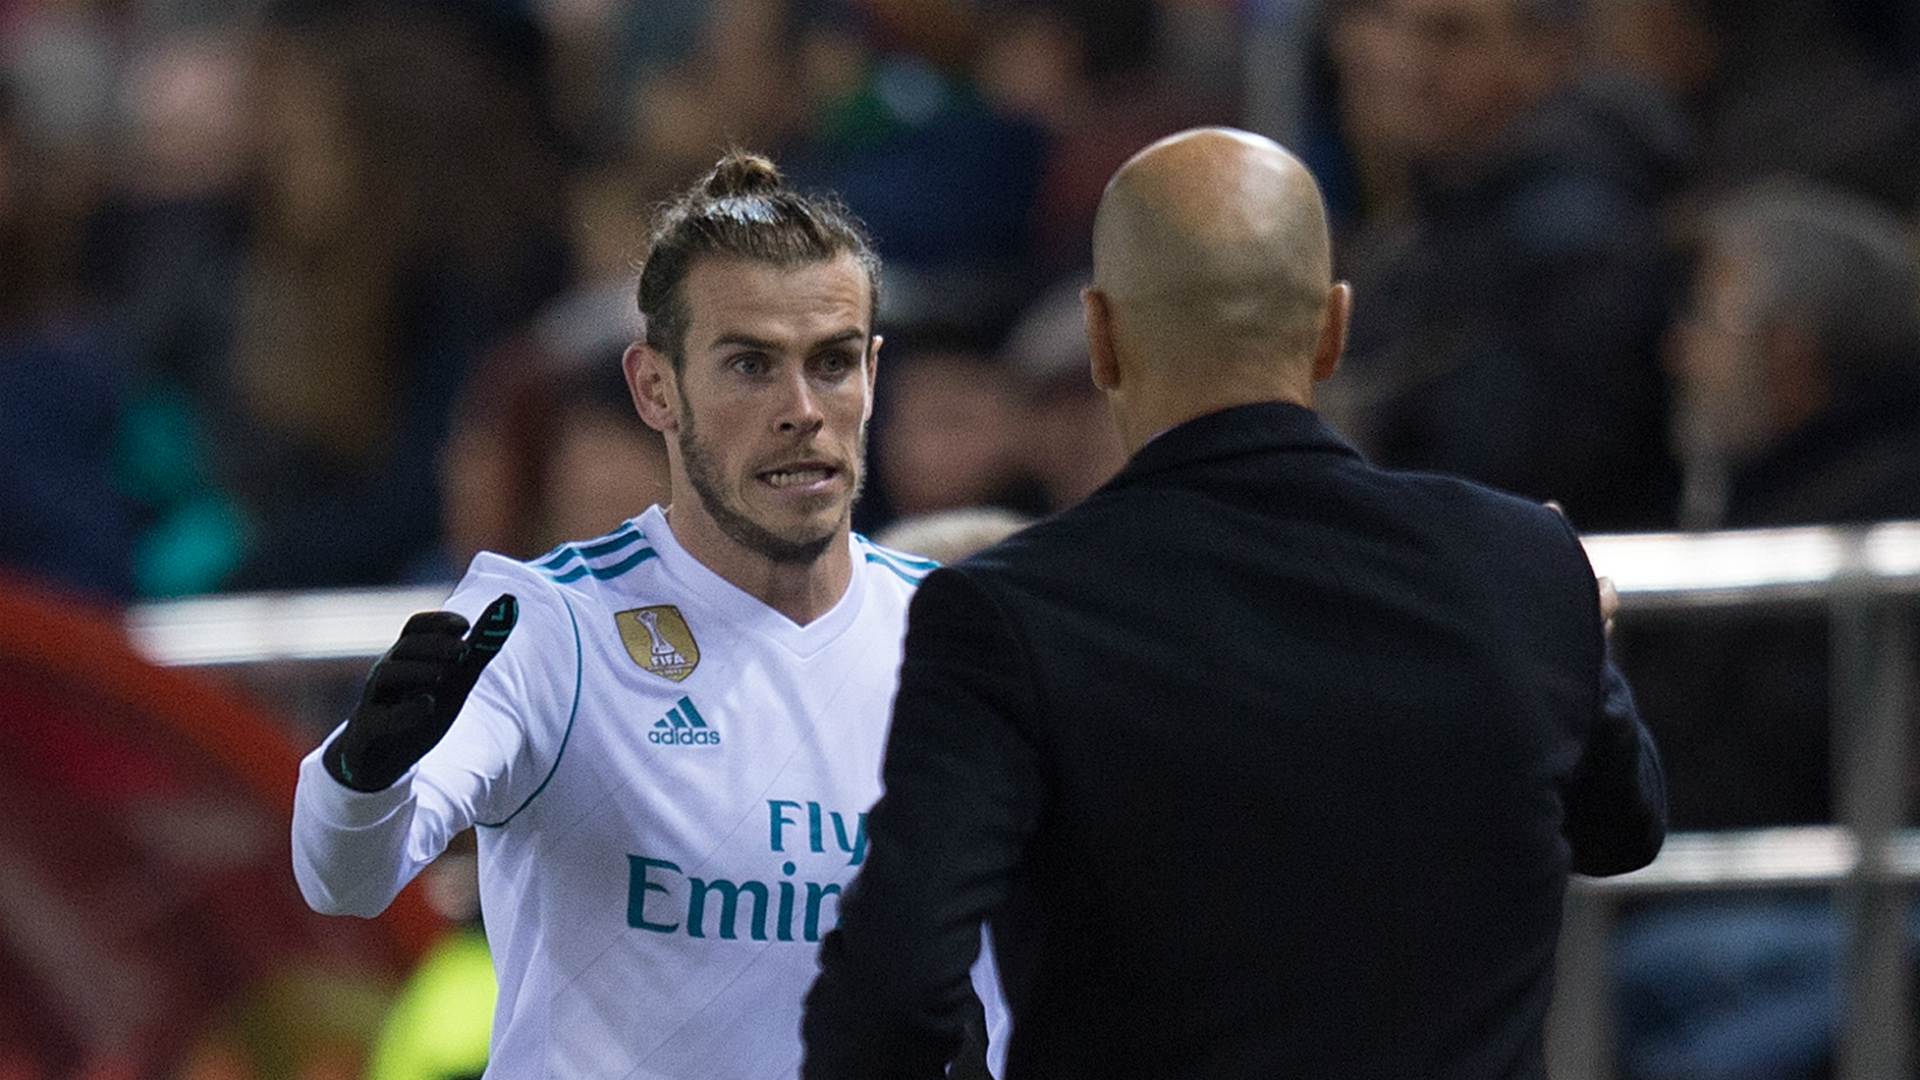 Zidane praises Real Madrid's fringe players after Copa del Rey win